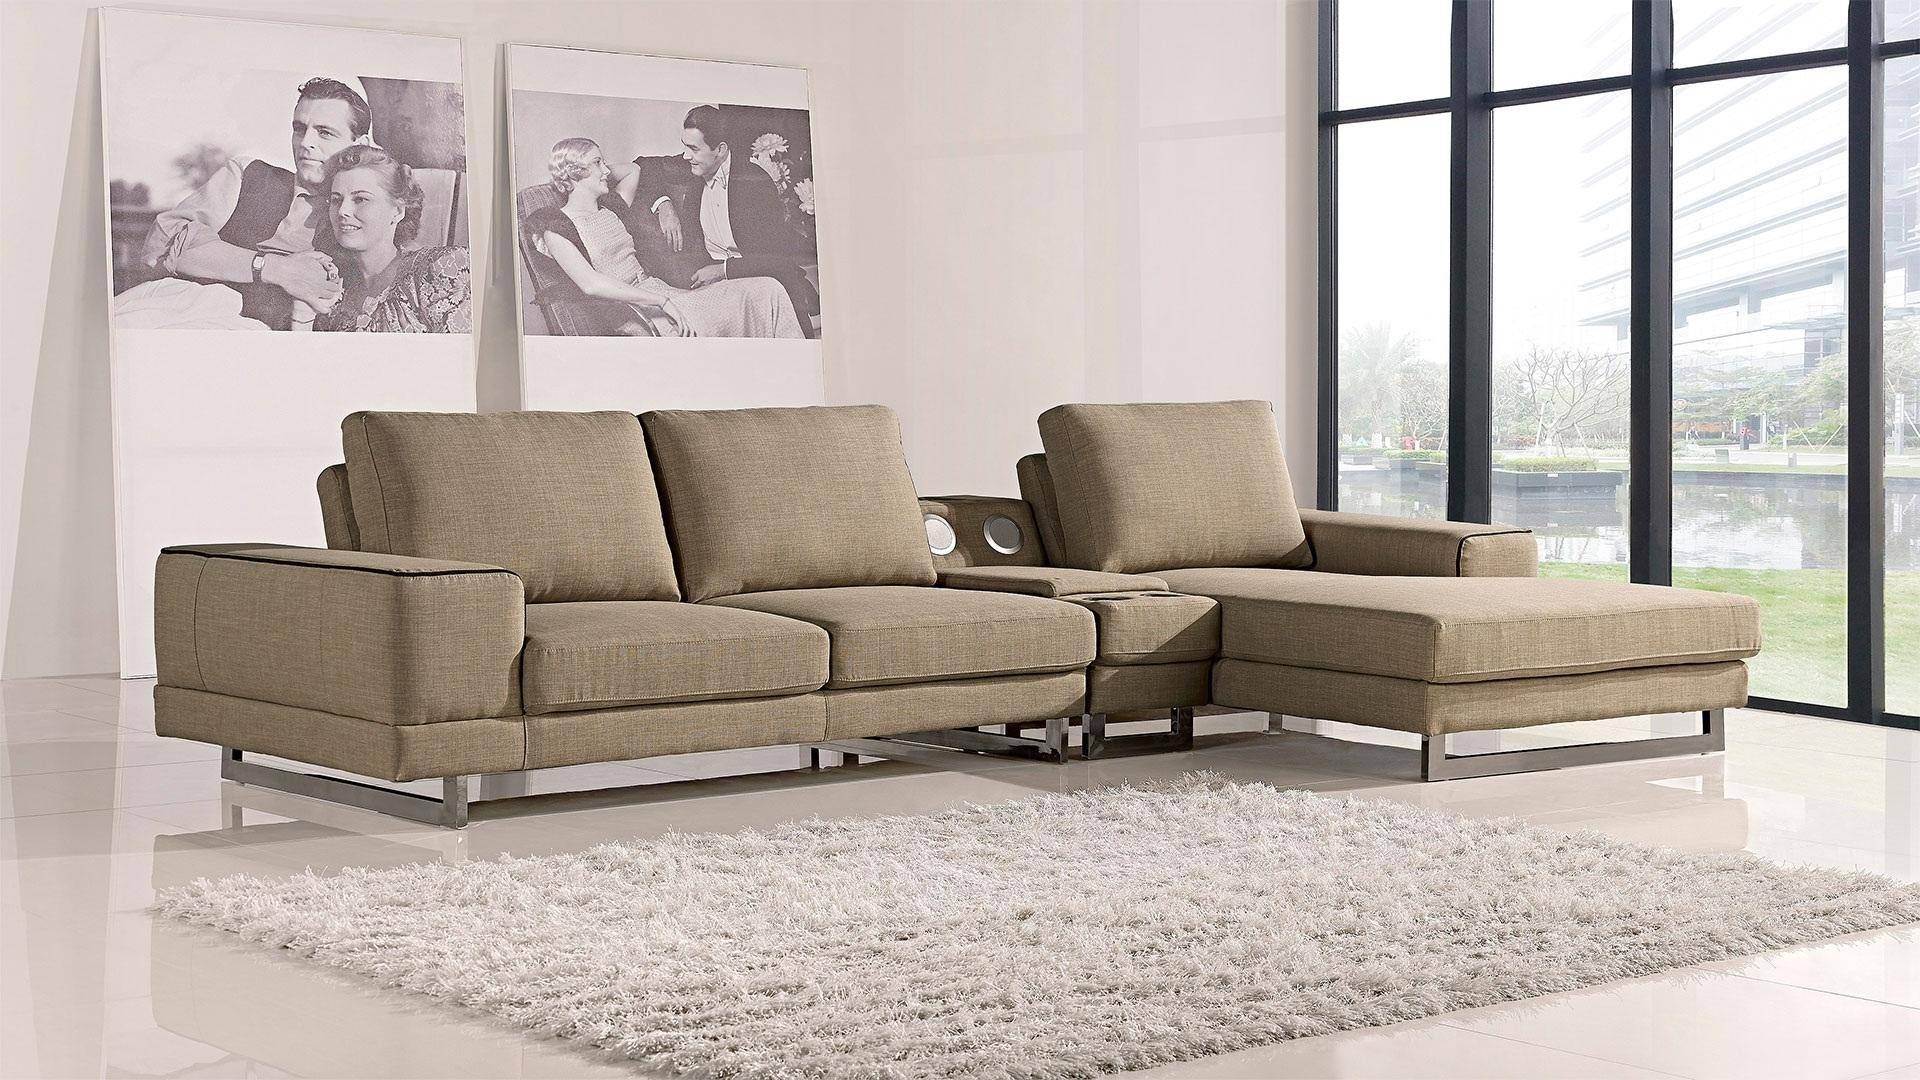 At Home Usa Adele Ultra Modern Beige Fabric Sectional Sofa Throughout Contemporary Fabric Sofas (View 2 of 15)